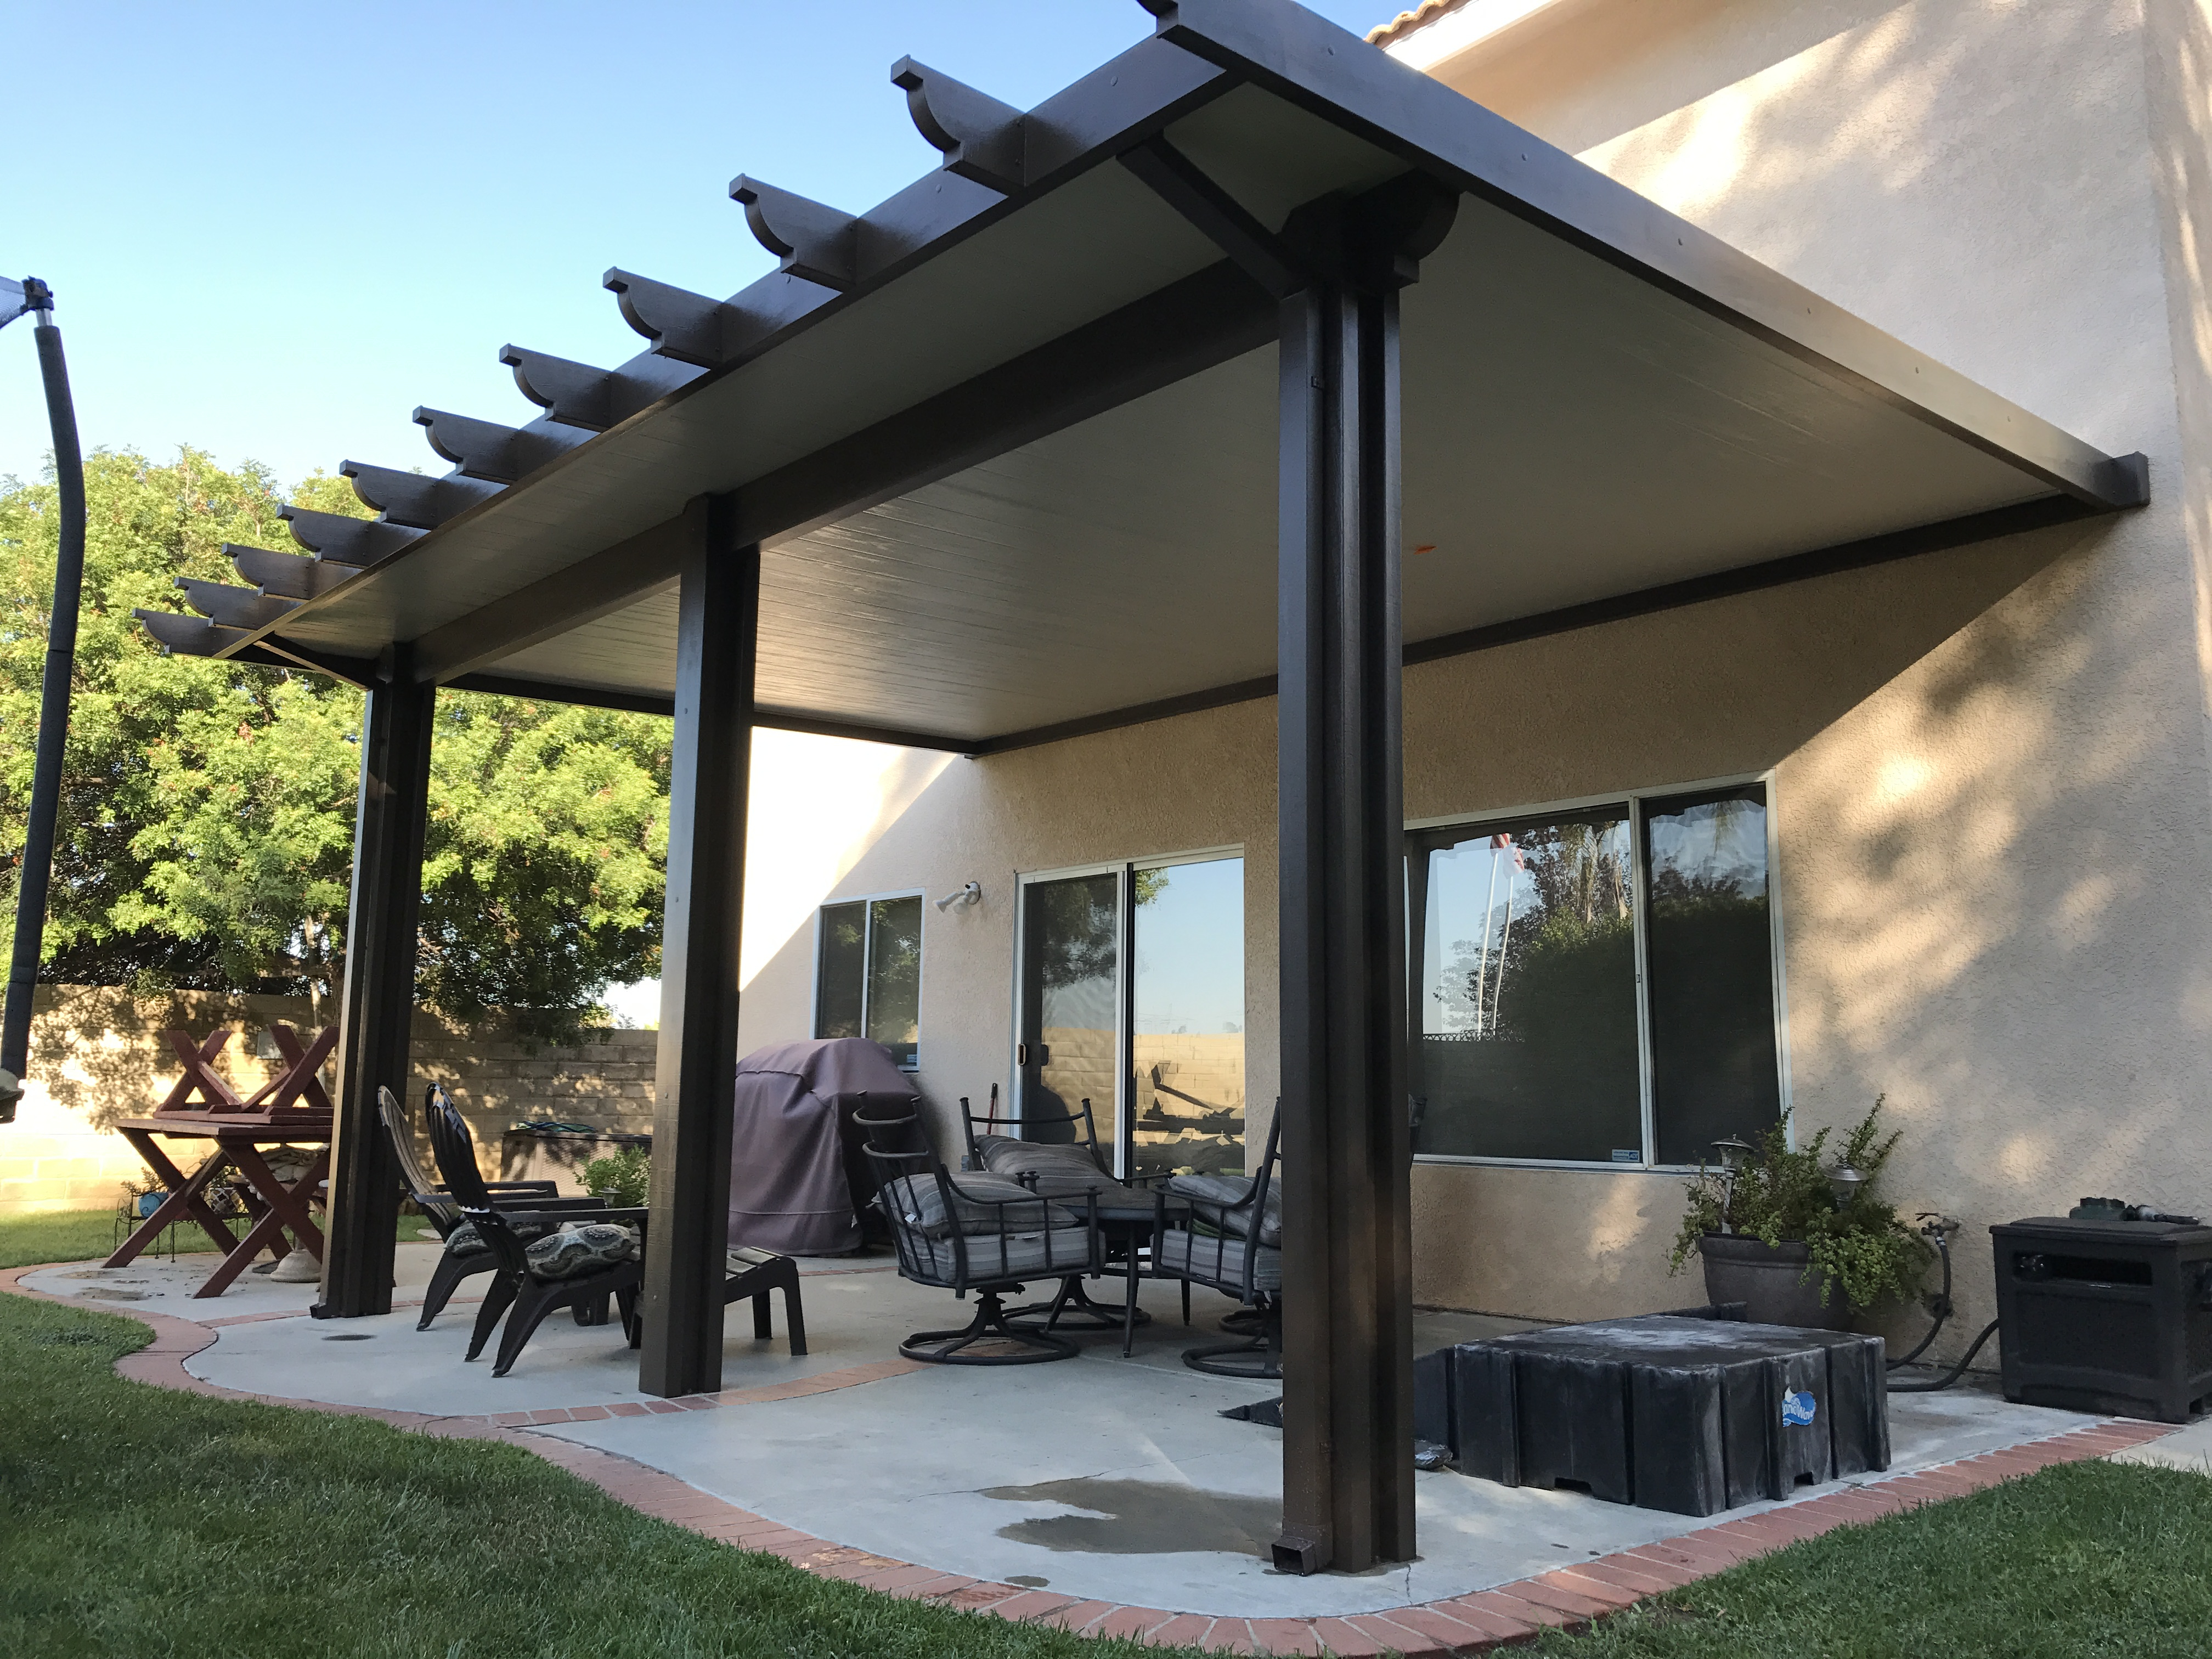 Alumawood Insulated Roofed Patio Cover Patiocovered pertaining to proportions 4032 X 3024